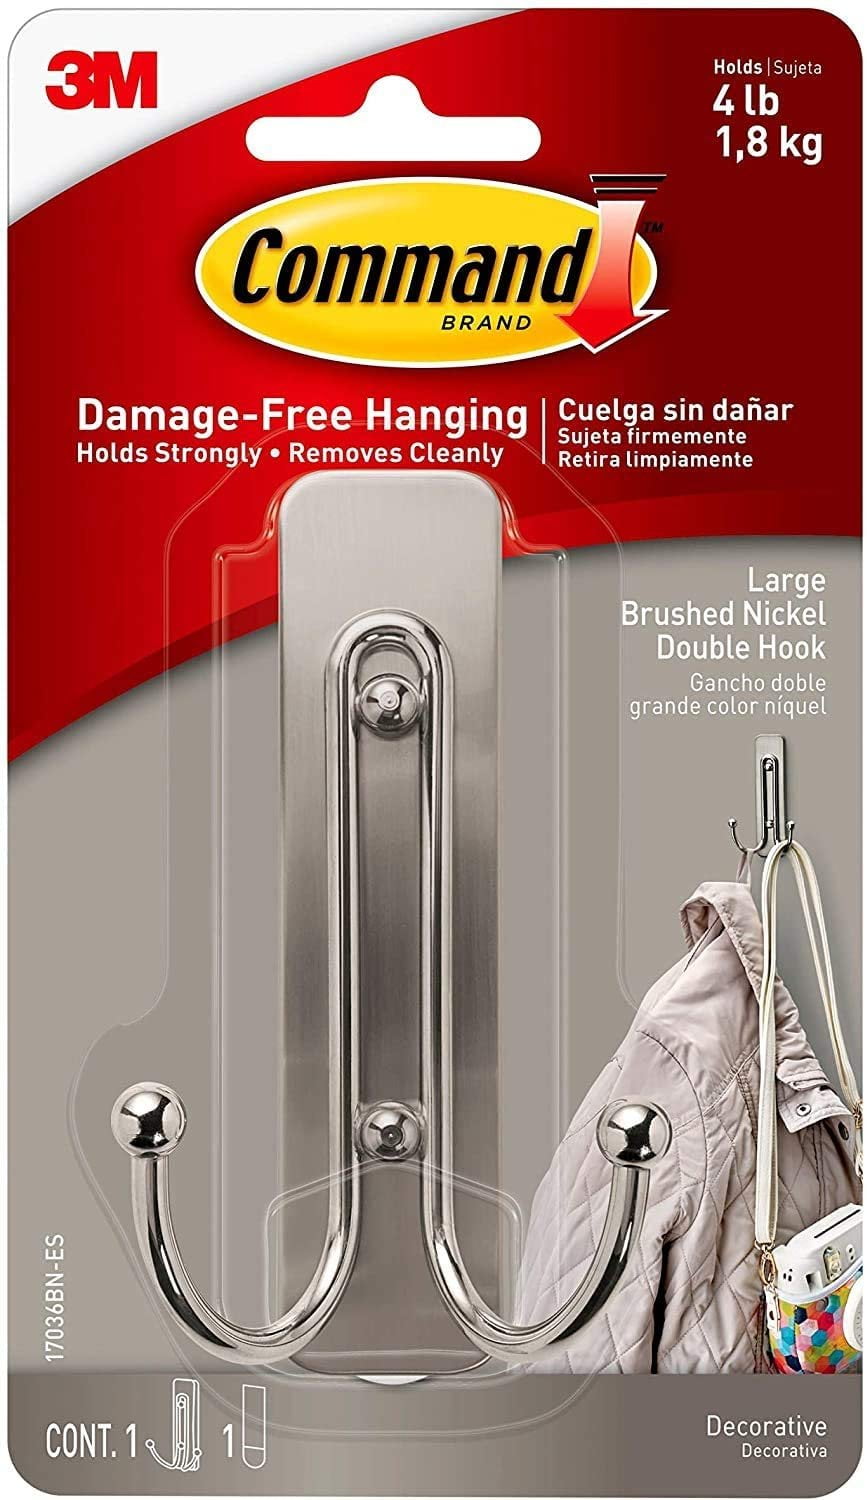 Command Wall Hooks, Large, Brushed Nickel, 17036BN-ES Decorate Damage-Free  - 1 Pack 